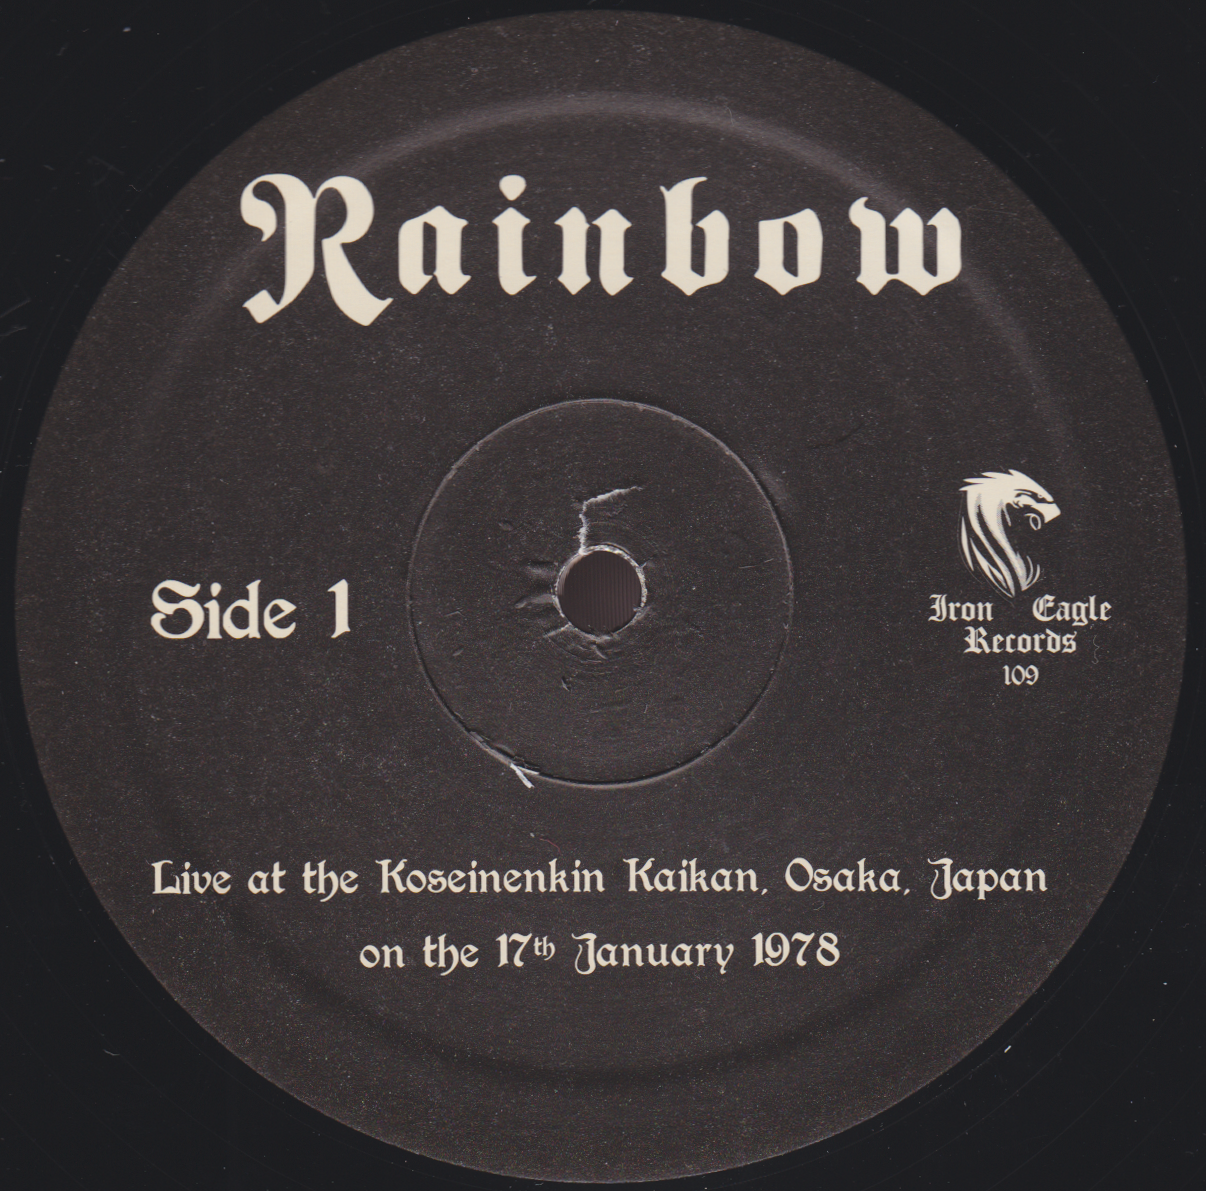 Tapio's Ronnie James Dio Pages: Rainbow LP Bootleg Discography 